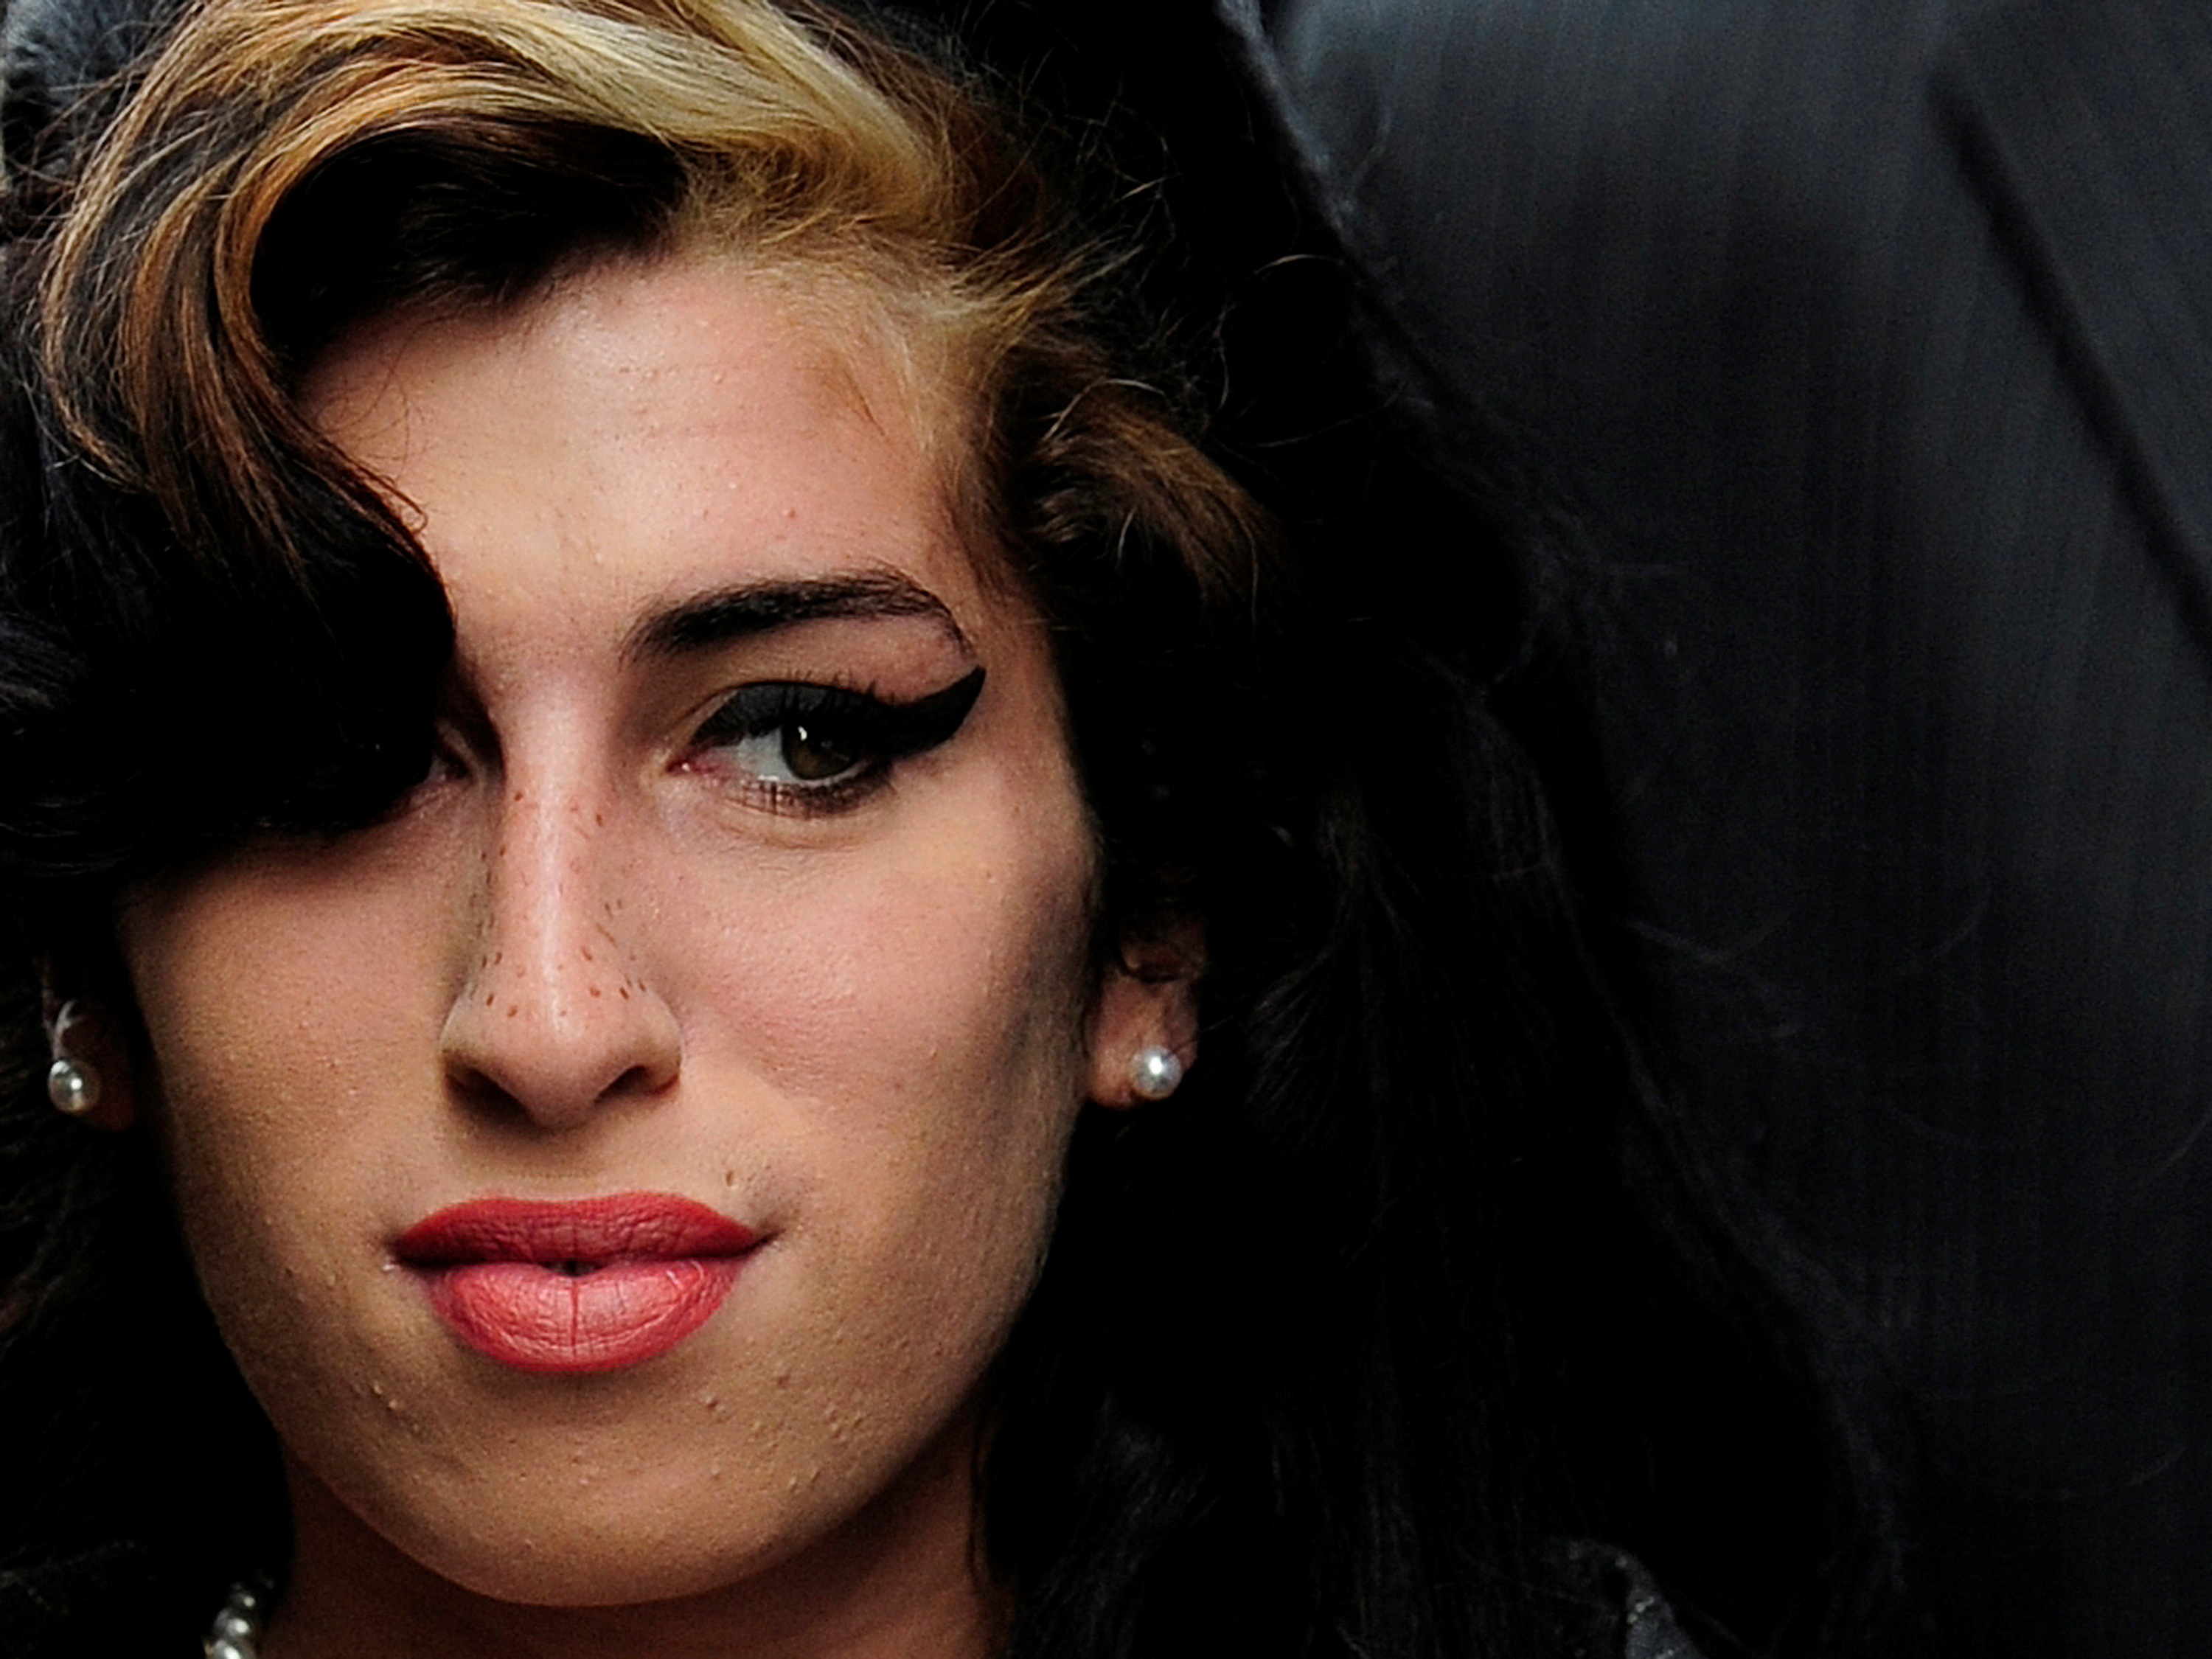 British singer Winehouse arrives at Westminster Magistrates Court in central London